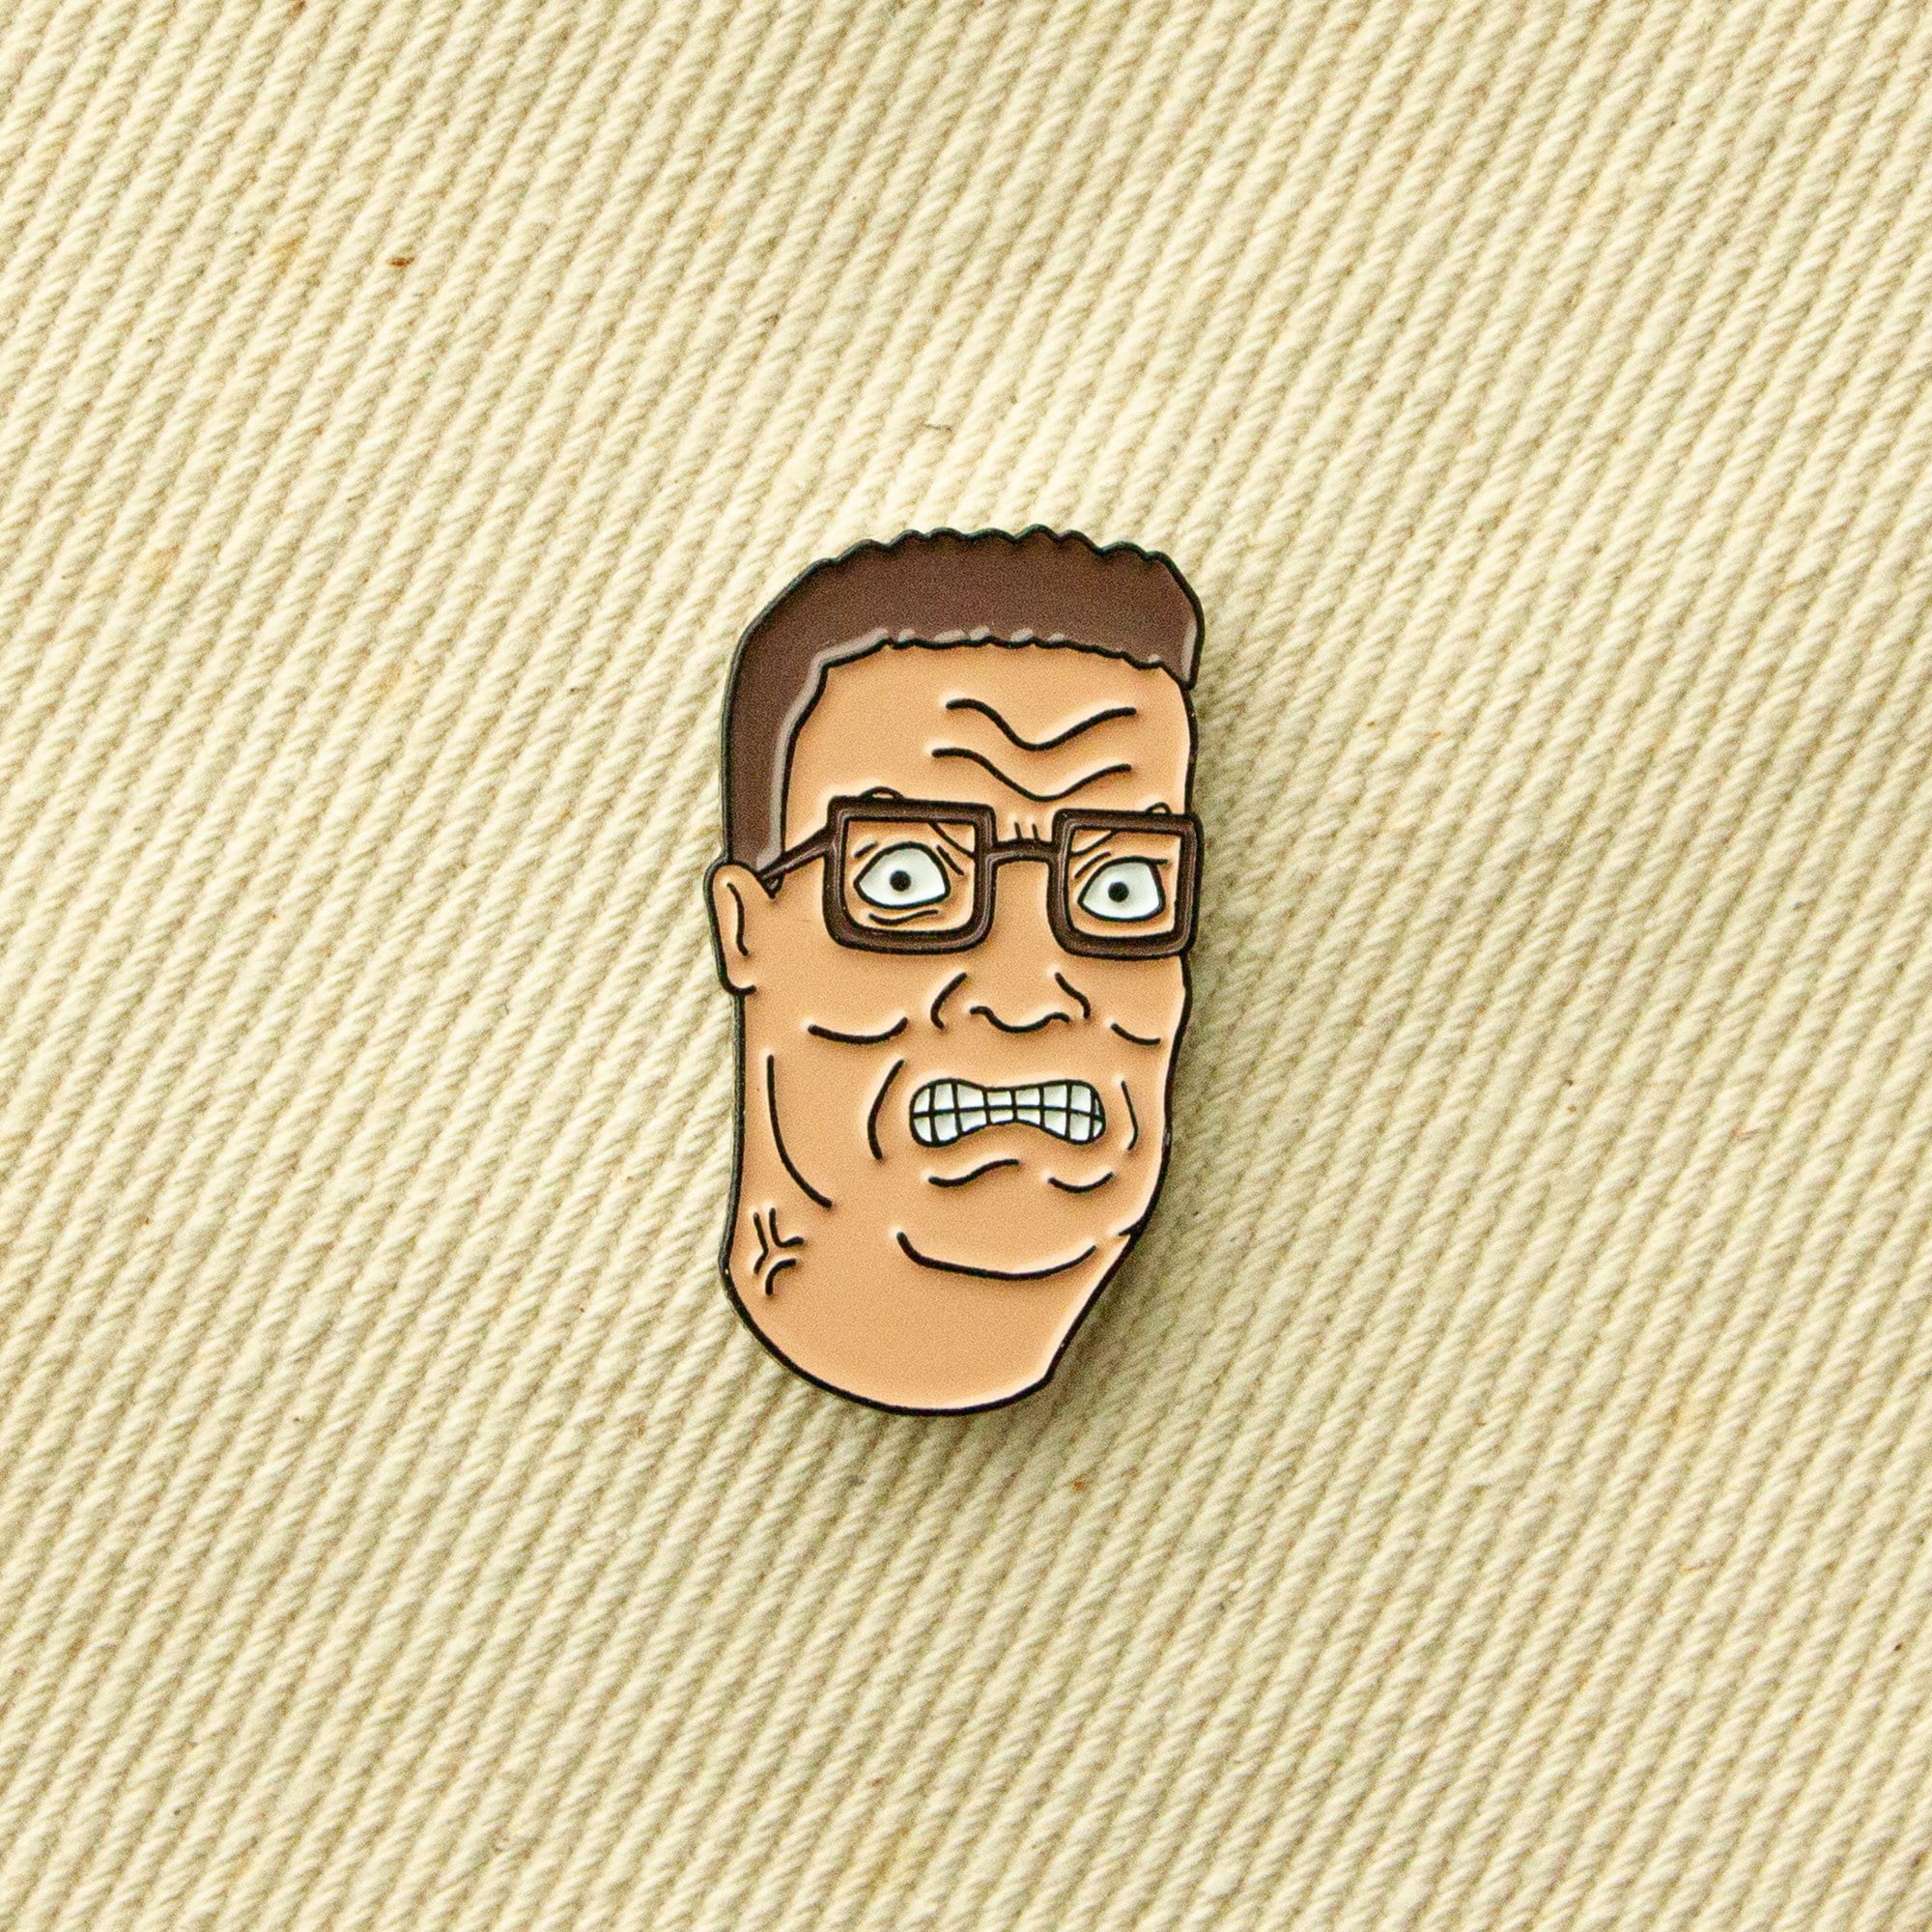 King Of The Hill 11 Pack Texas Beer Funny Meme Sticker Hank Hill Bobby